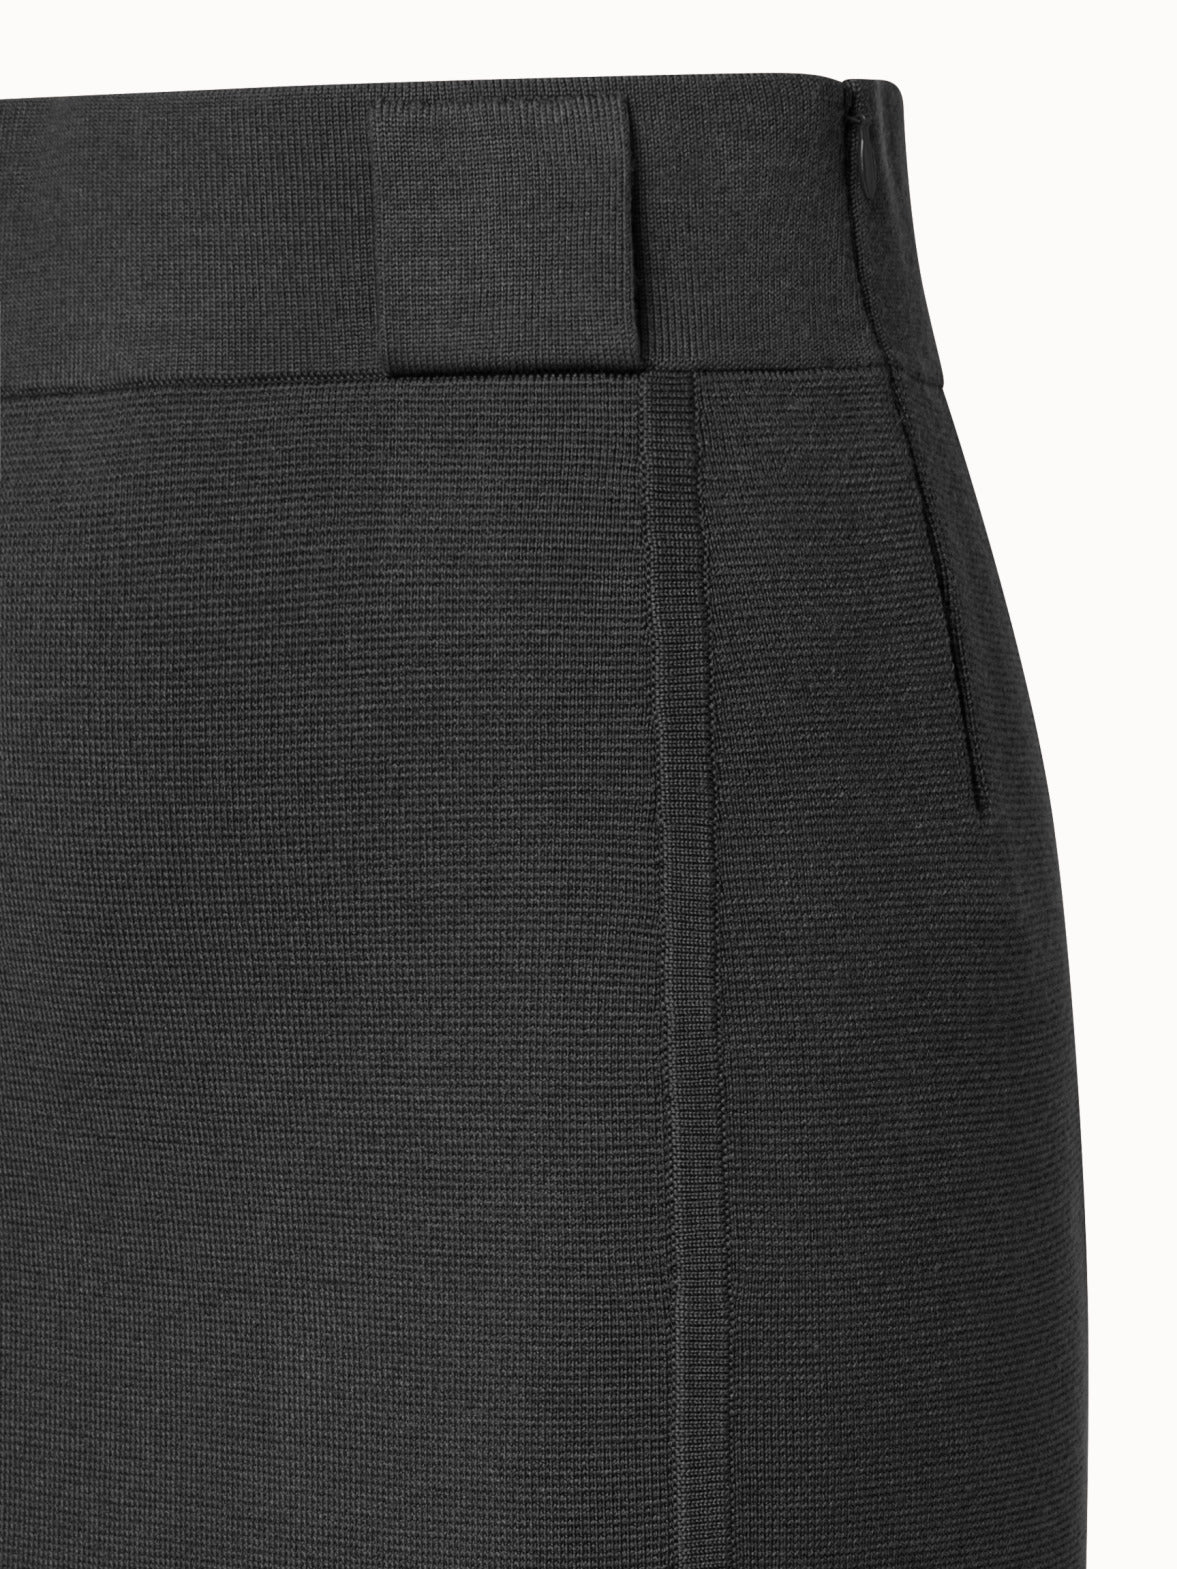 Pencil Skirt from Wool Double-Face with Back Slits